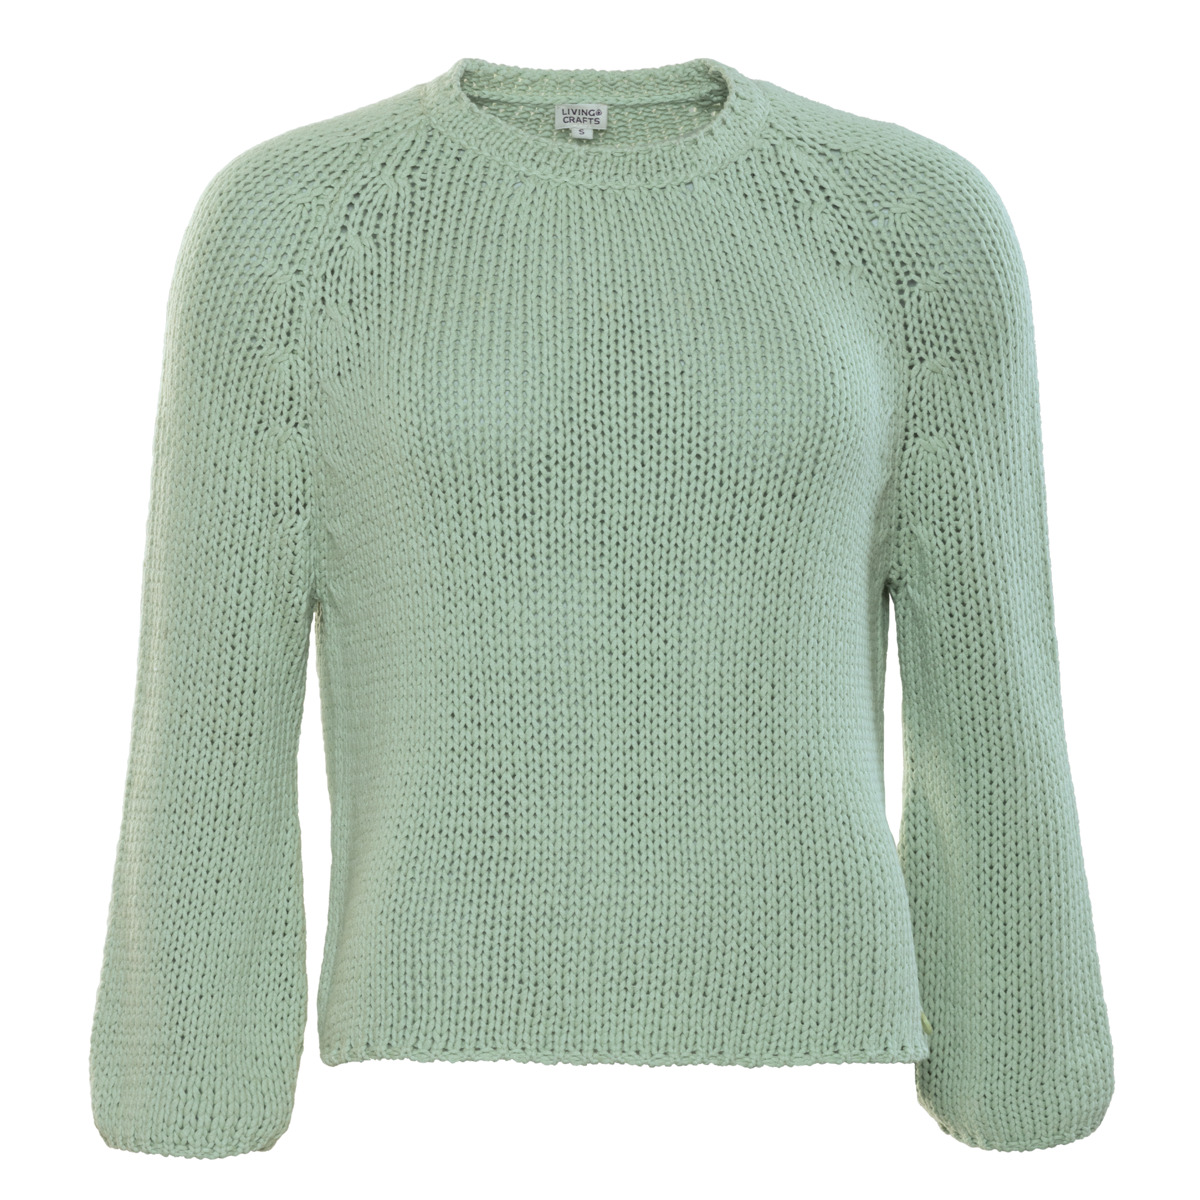 Vert Pull-over, manches 3/4, RICARDA